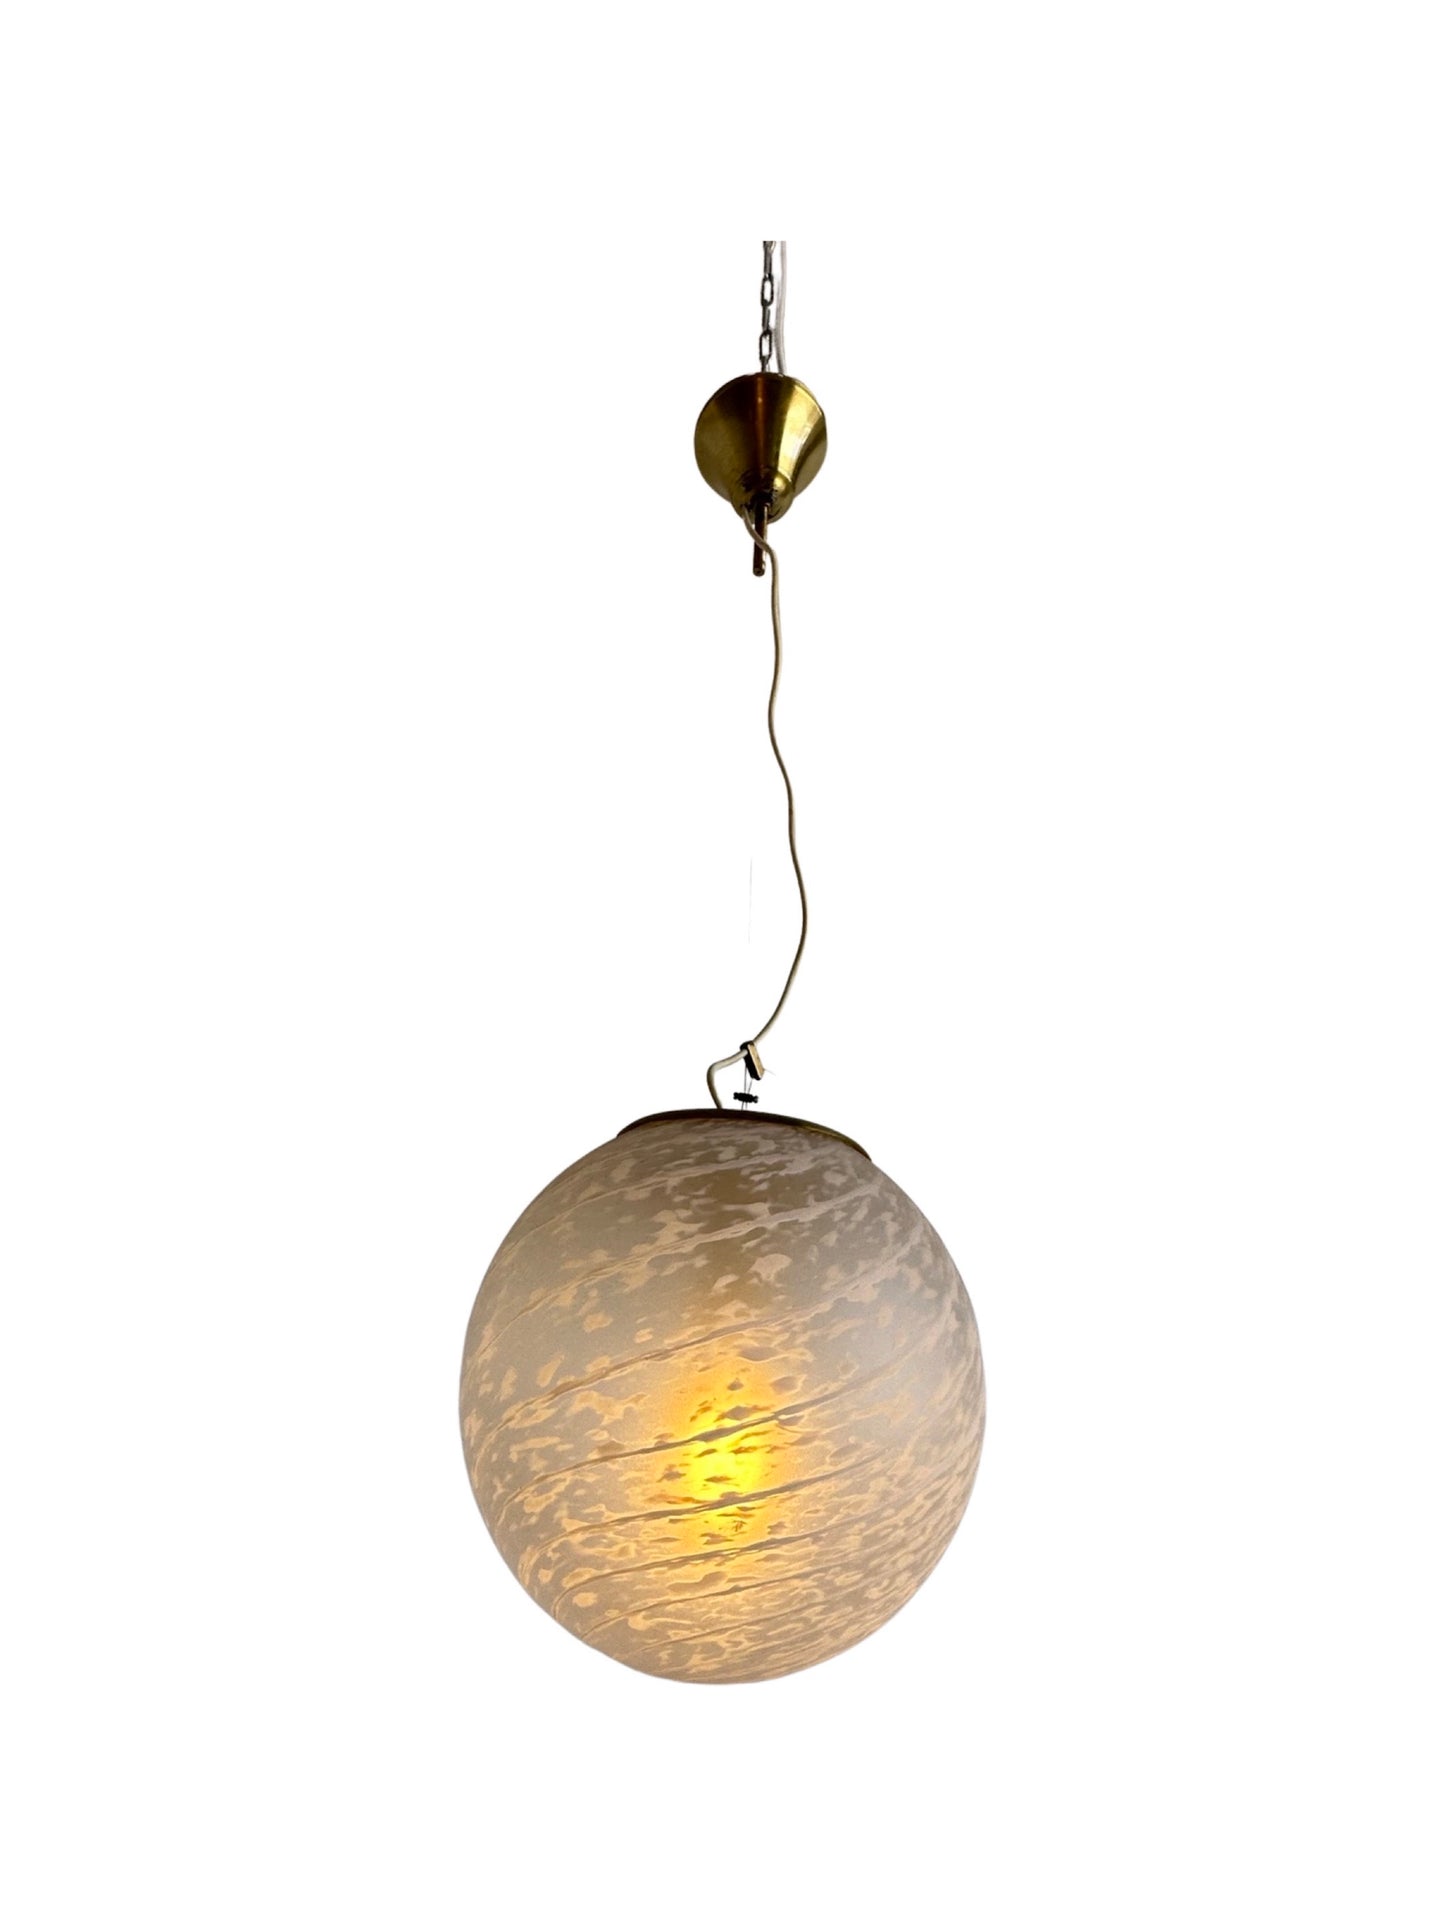 Paolo Venini Spherical Murano Glass with White Stripes & Brass Pendant Light, 1960s